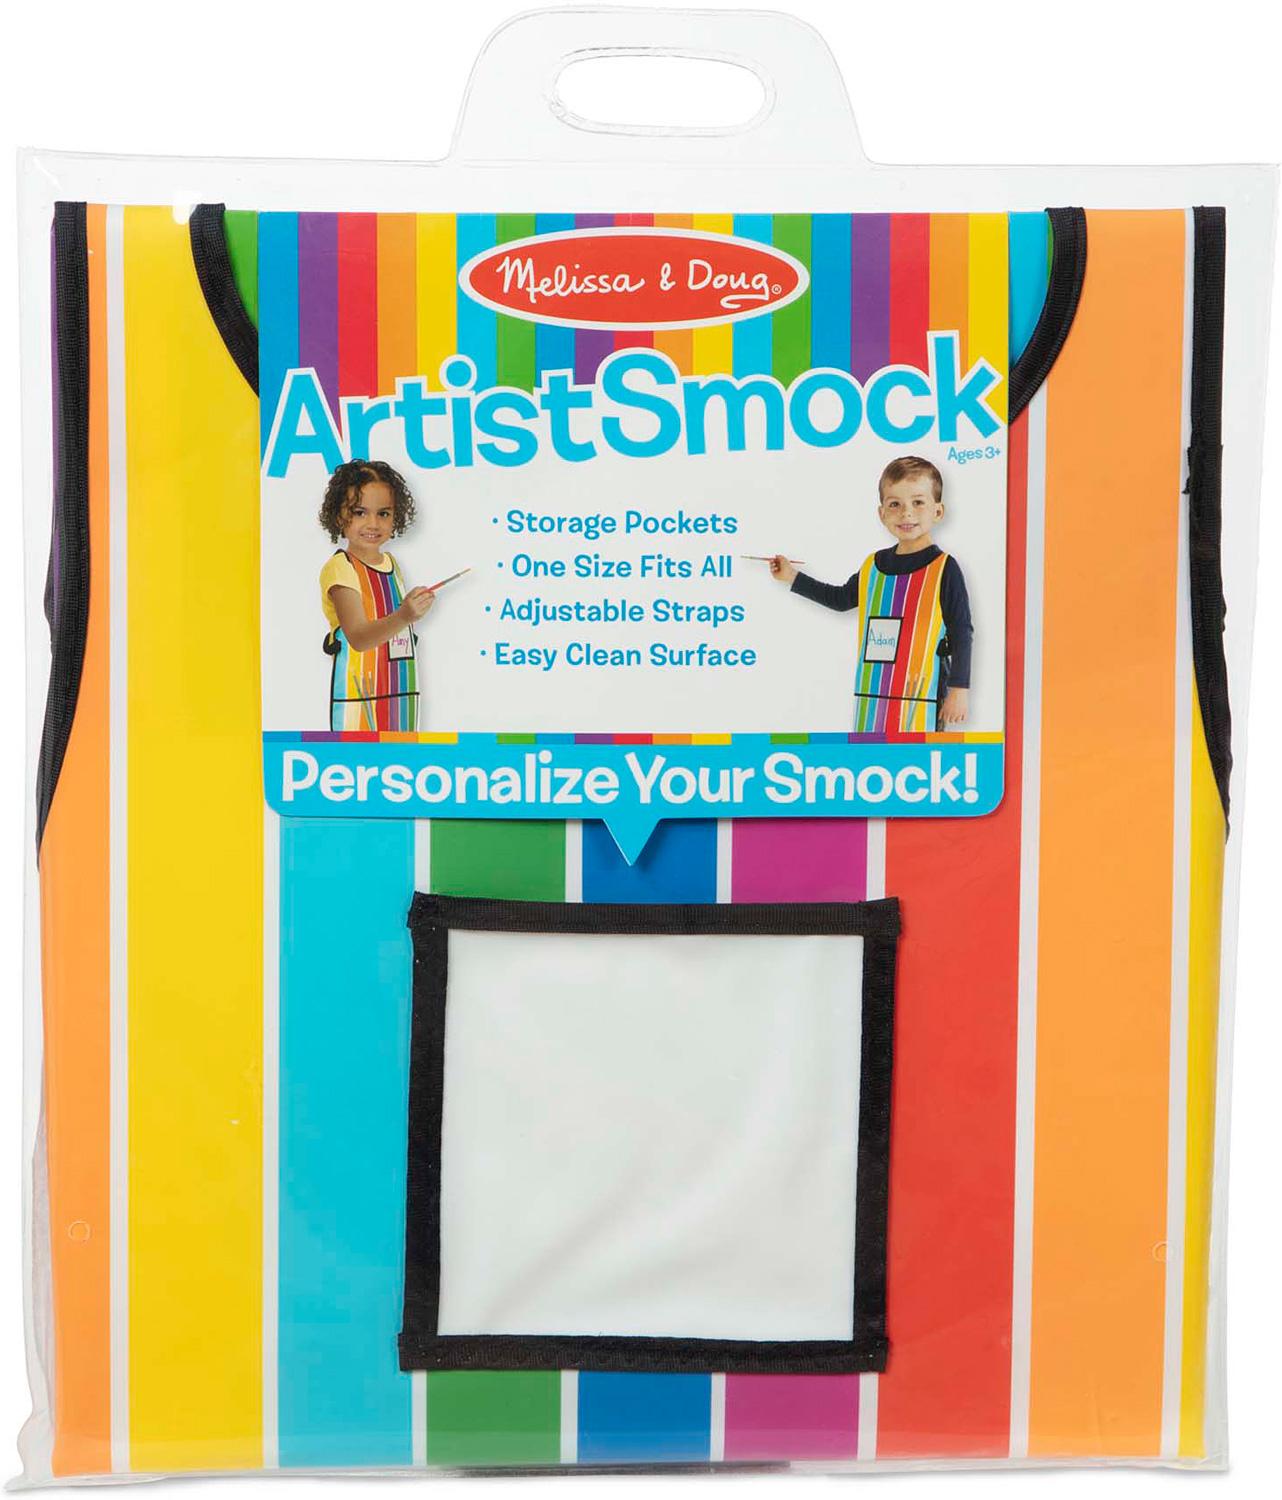 THE ARTISTS SMOCK